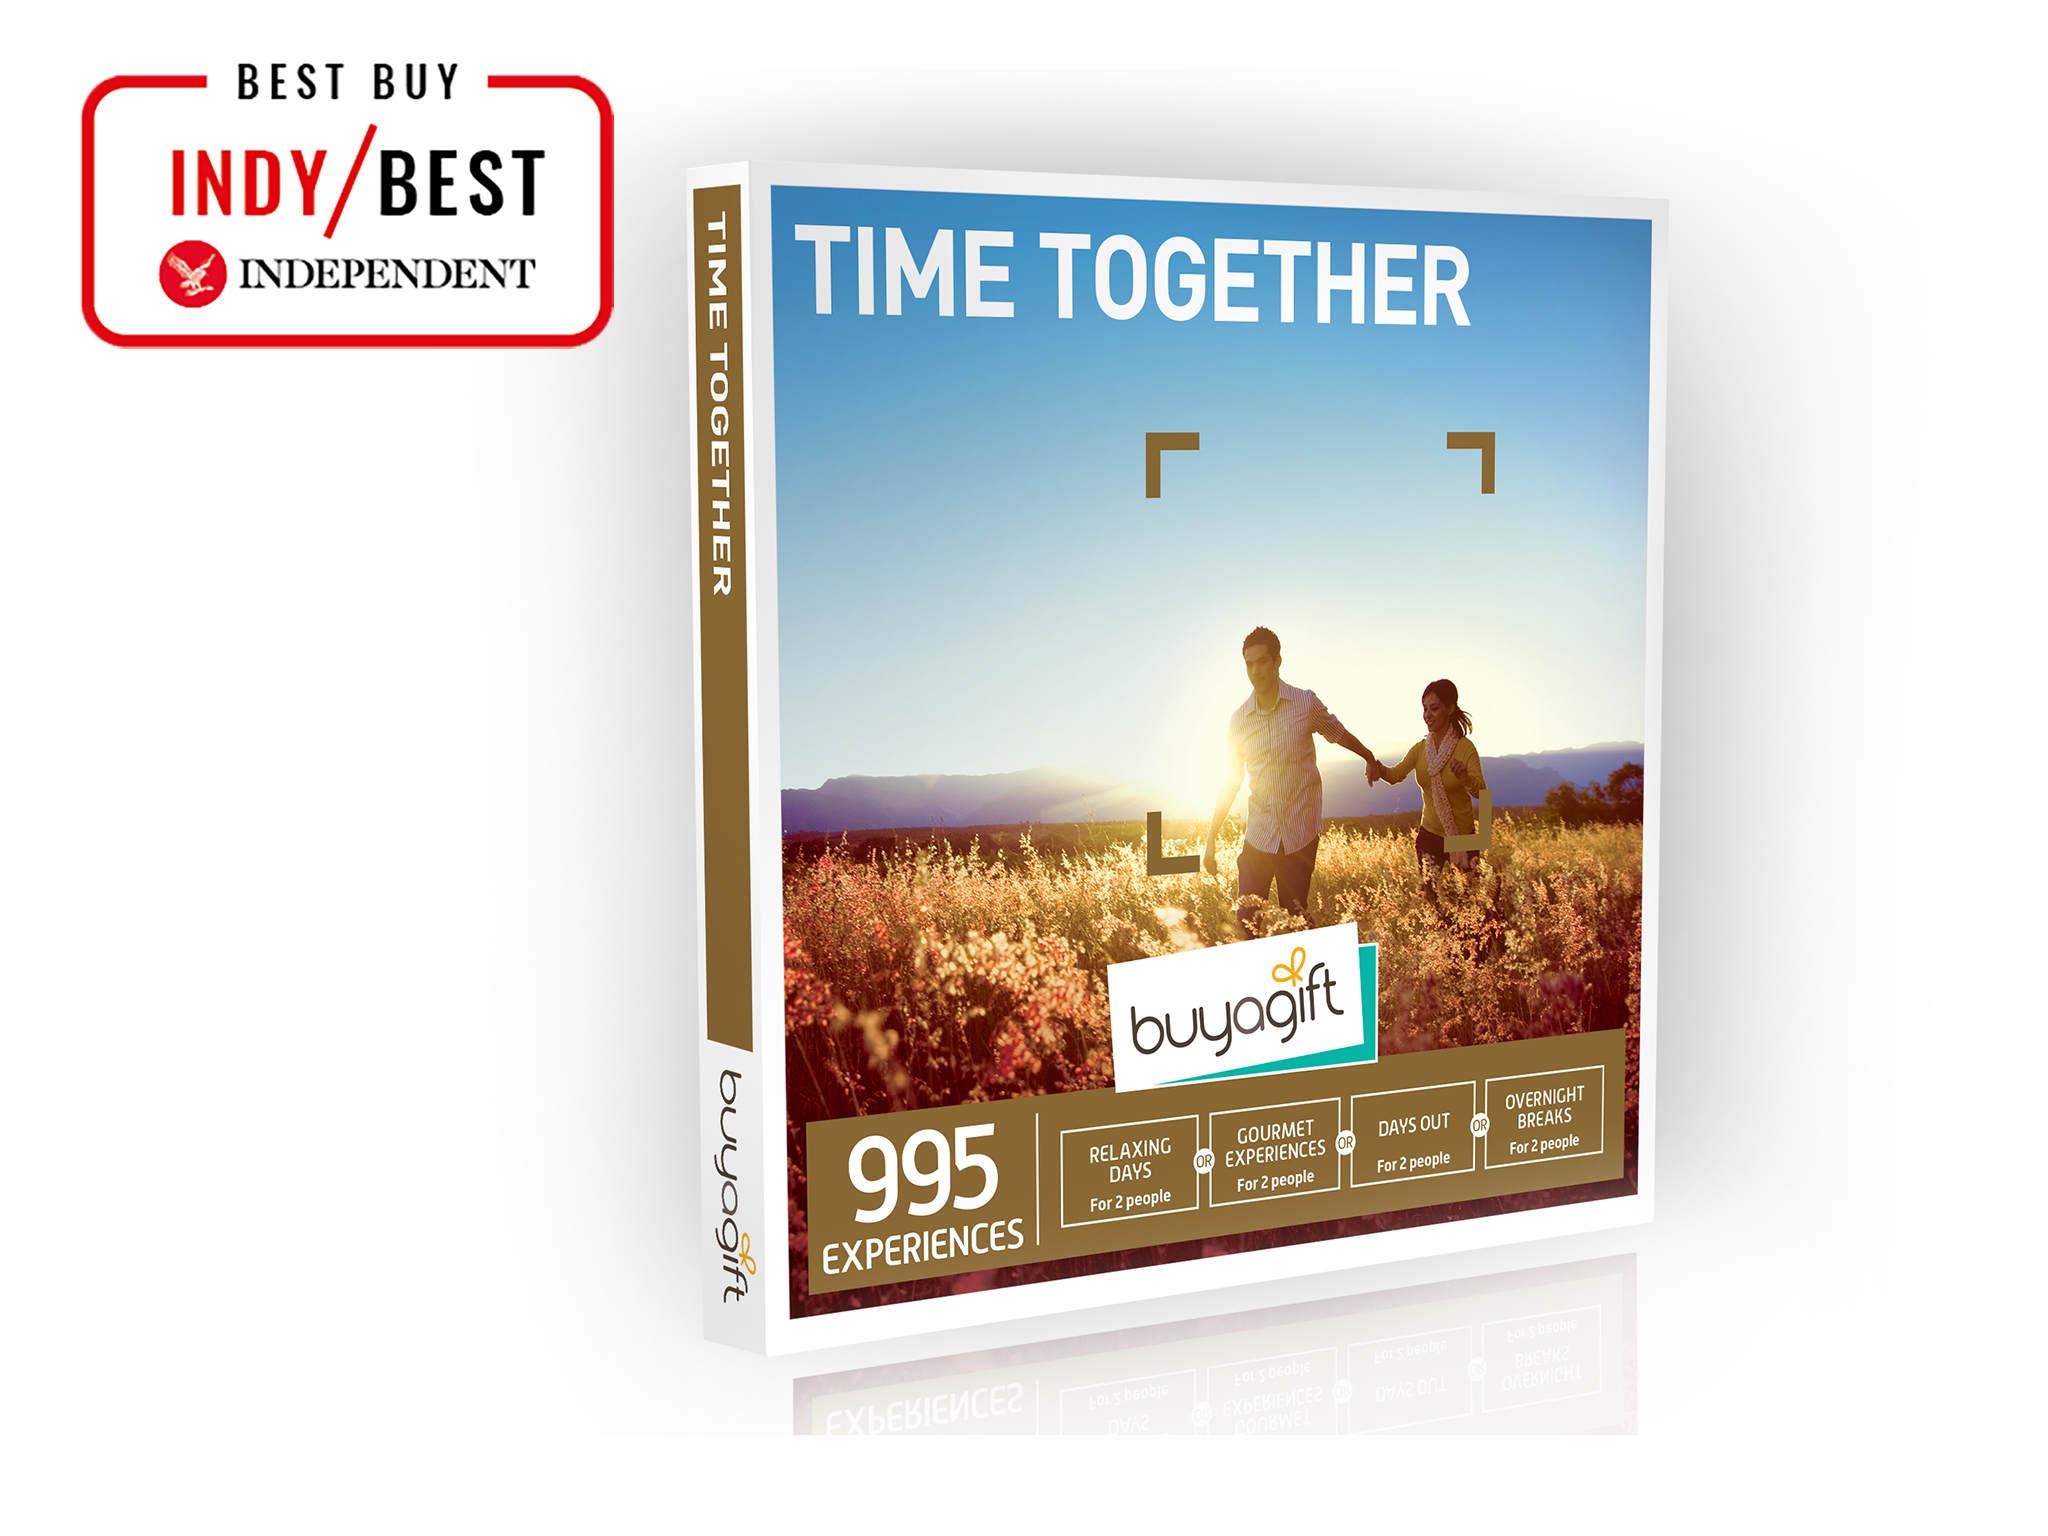 Buyagift time together experience box